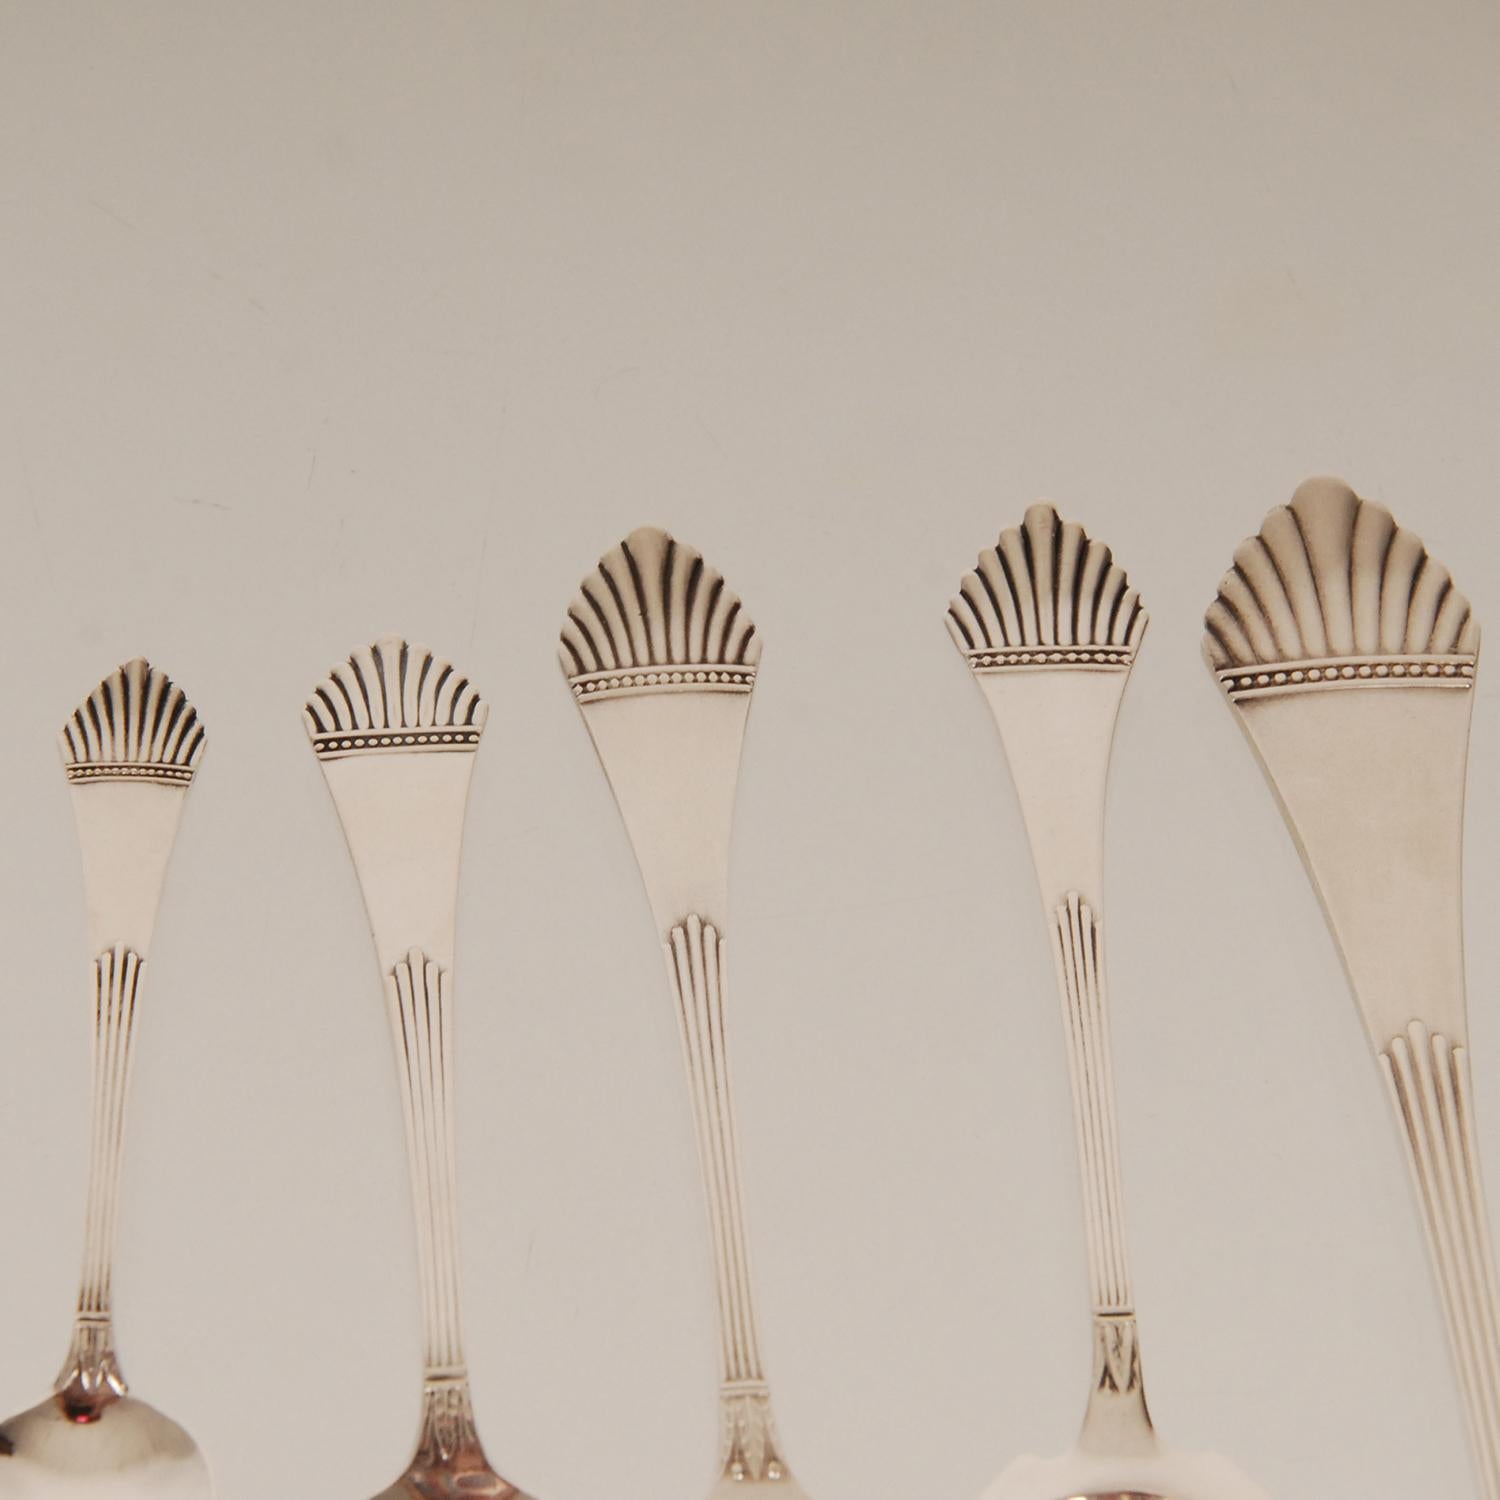 Hand-Crafted Art Deco Sterling Silver Flatware 1920s Spoons, Forks, Cake Server Set 31 Pieces